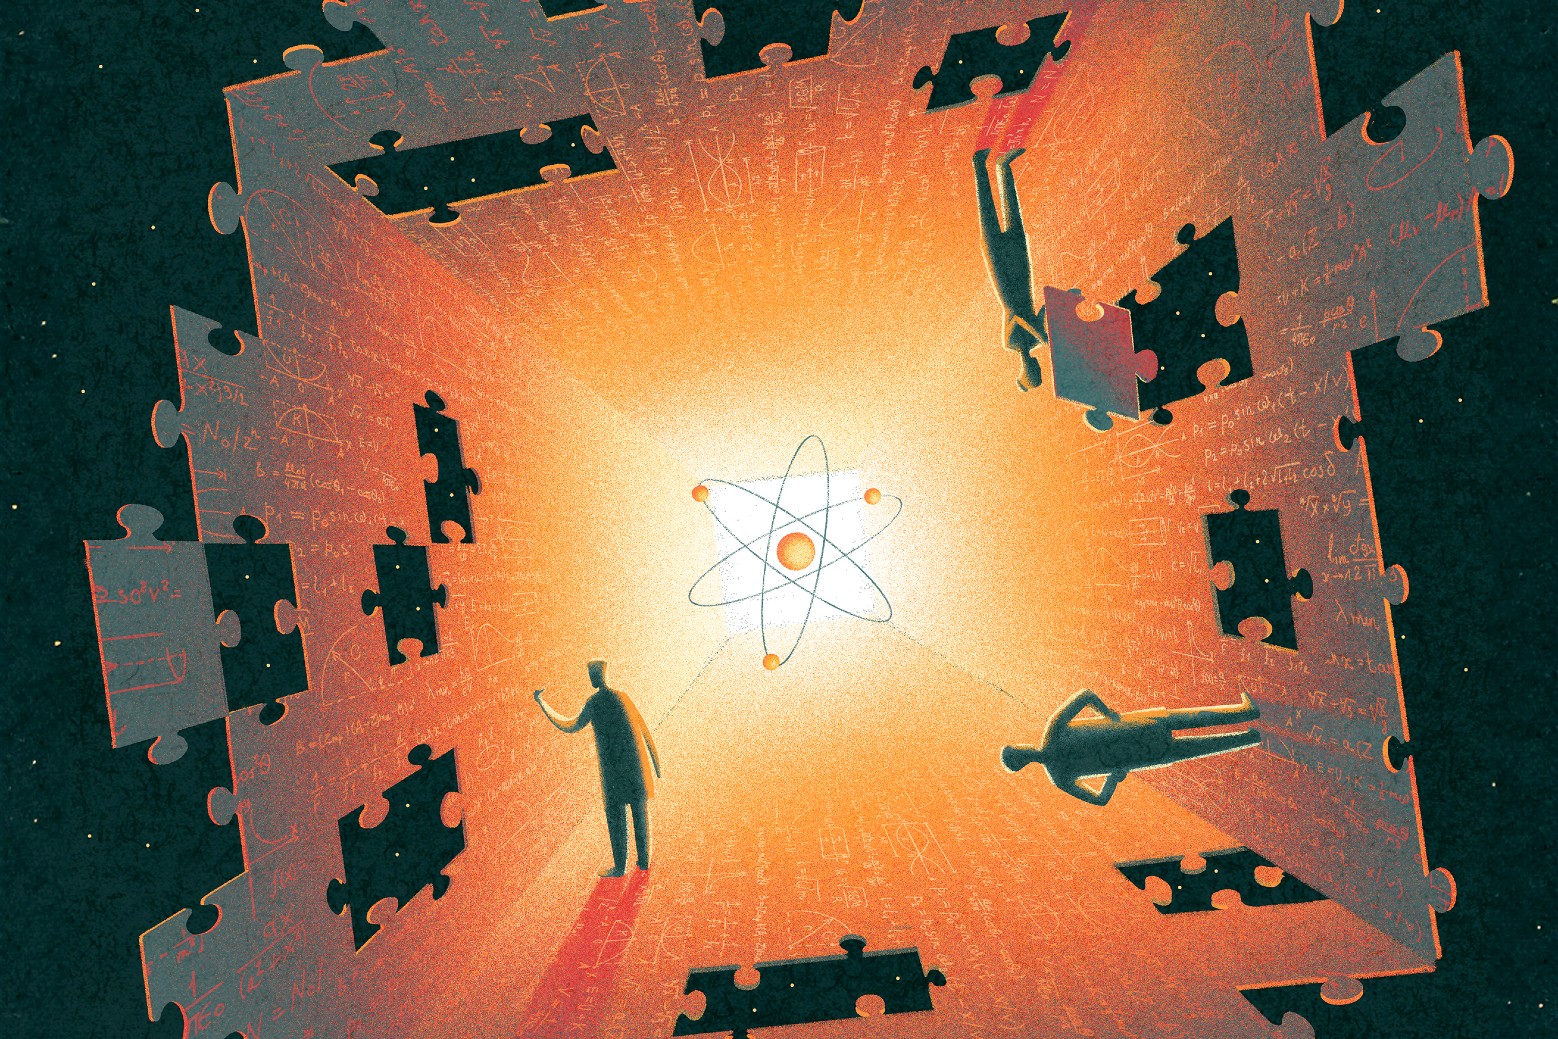 Cover of the Winter 2023 issue of Contours, the Faculty of Science alumni magazine. An illustration by Myriam Wares shows scientists piecing together a puzzle that is the universe.